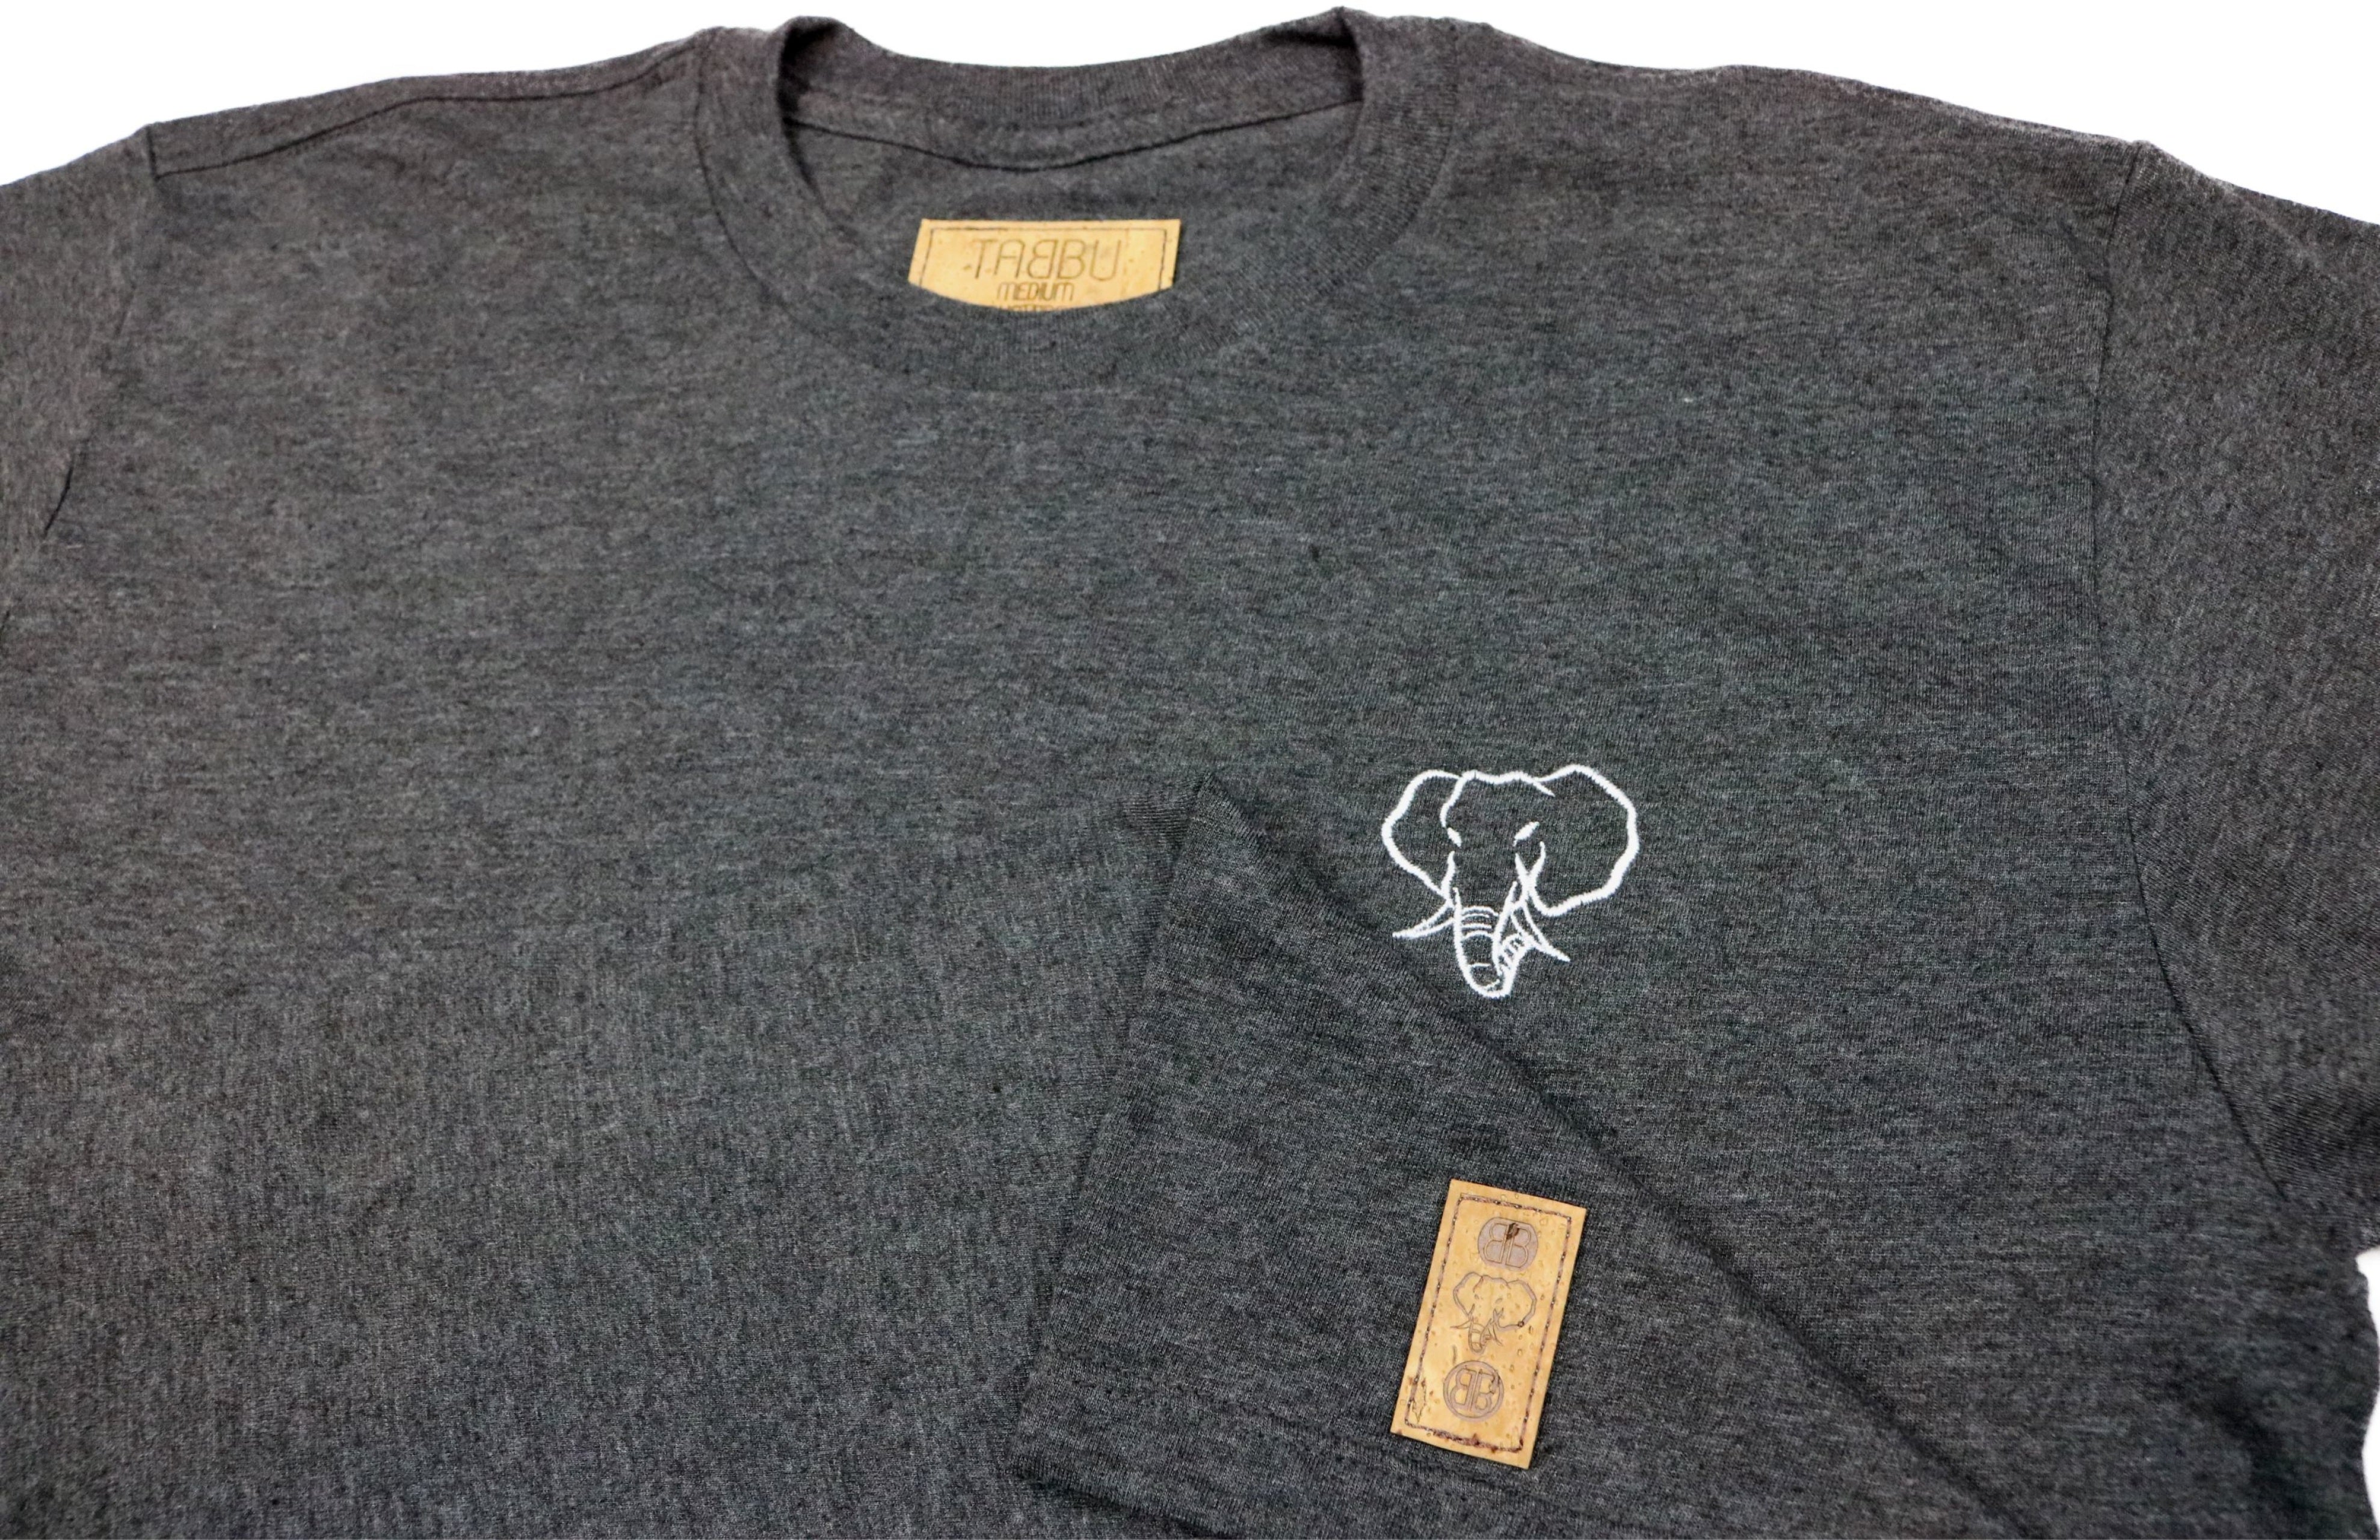 Elephant Head Crewneck Tee in Charcoal Heather with White Embroidery